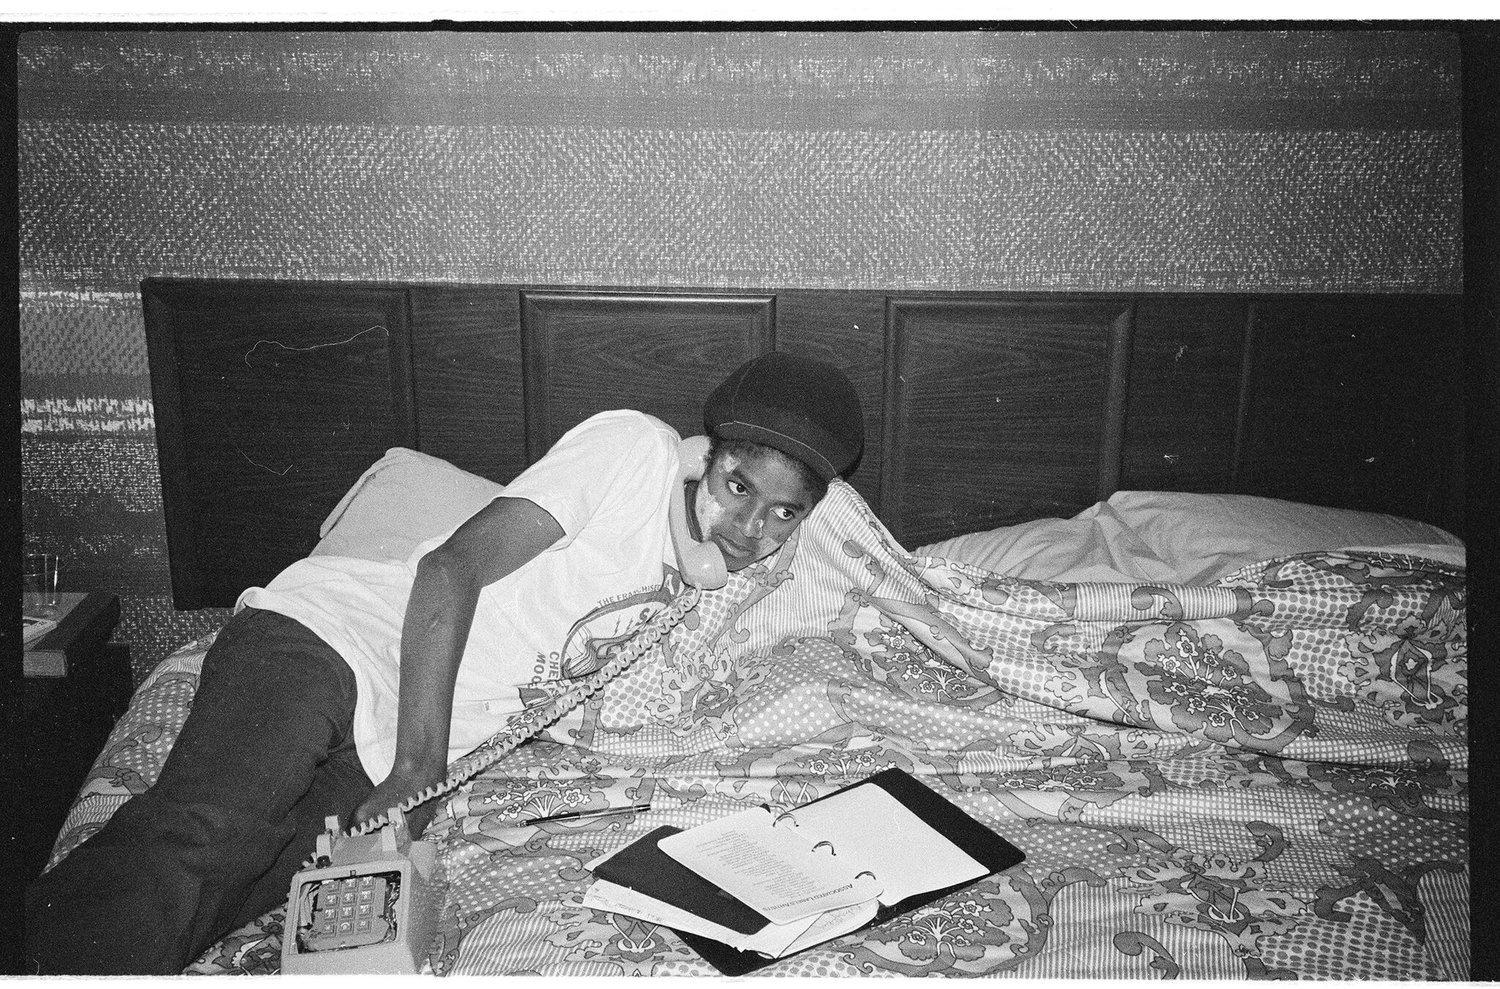 David Nutter Black and White Photograph - Michael Jackson XII